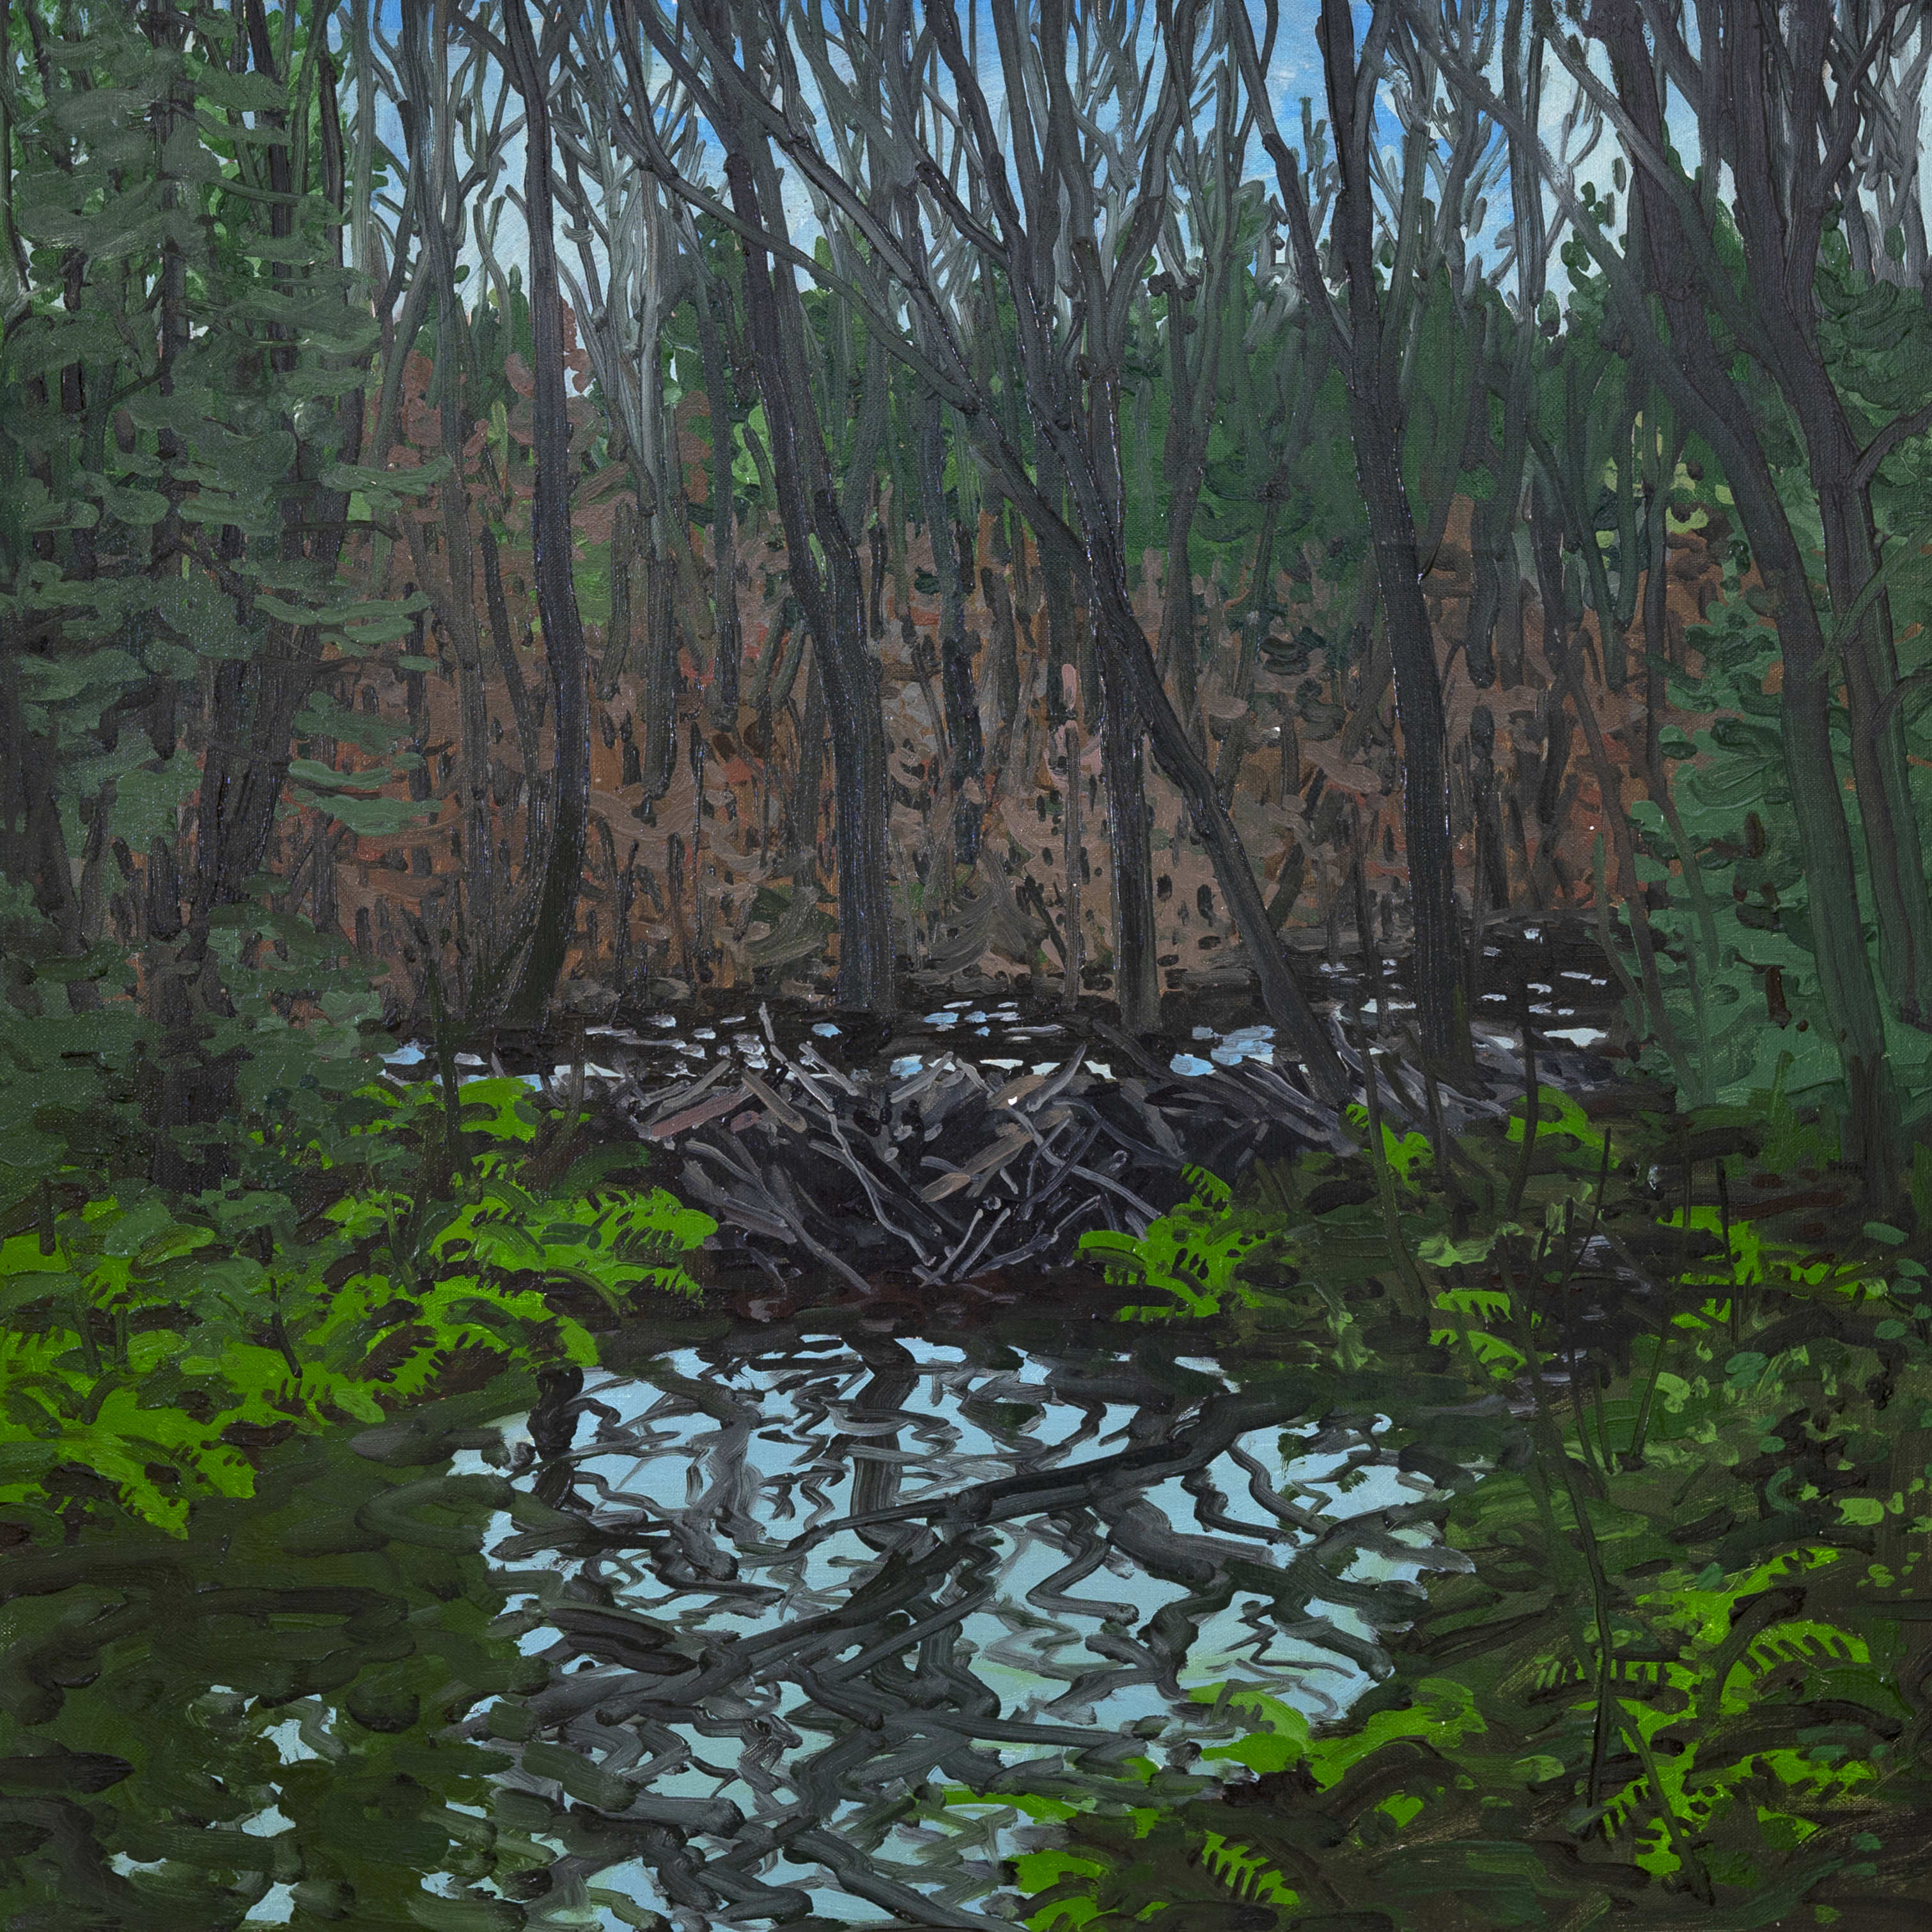 Neil Welliver, (American, 1929-2005) Beaver Pond. Sold For $22,500 At Partner Capsule Gallery Auction